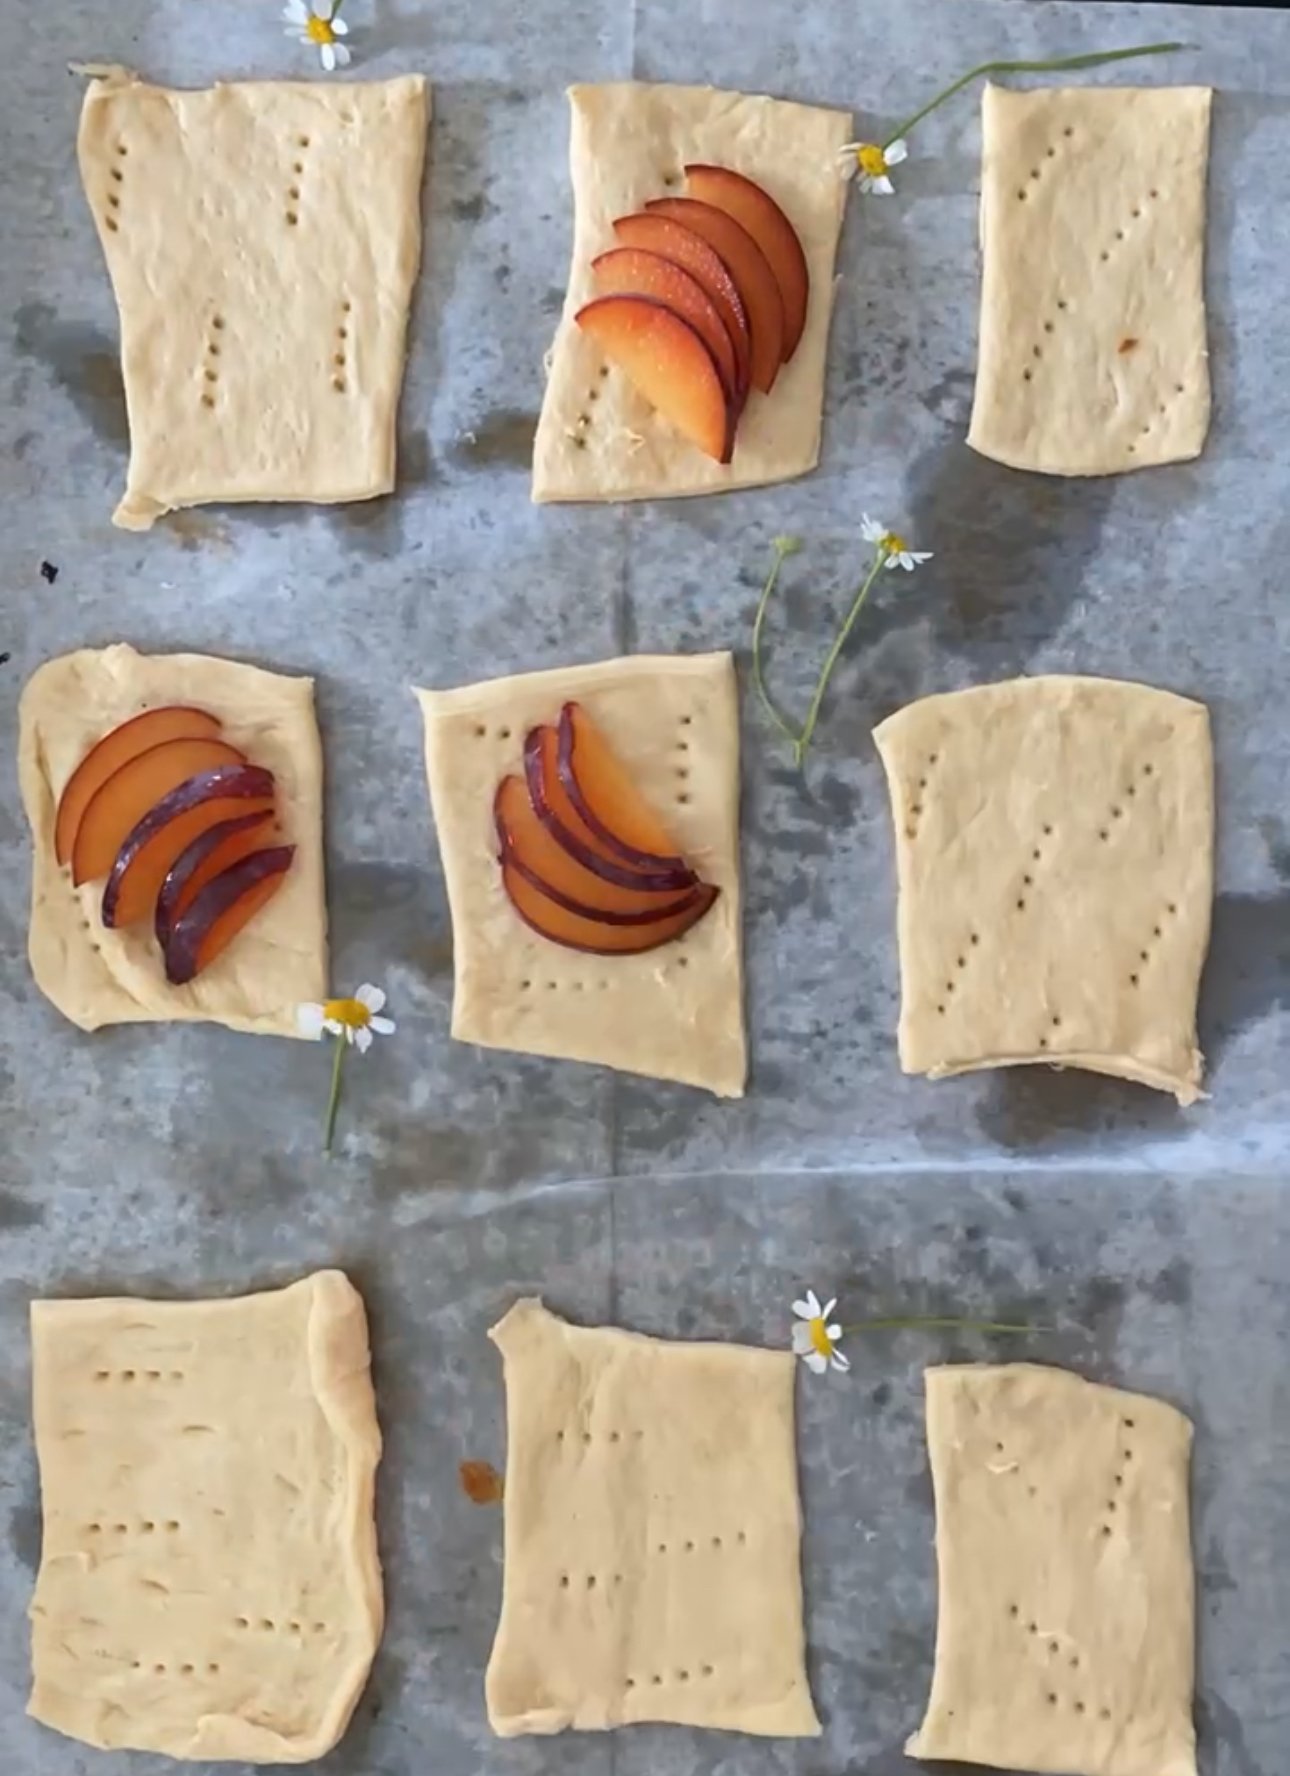 puff pastry tarts are rolled out on a baking sheet with plums starting to be assembled for plum tarts. 